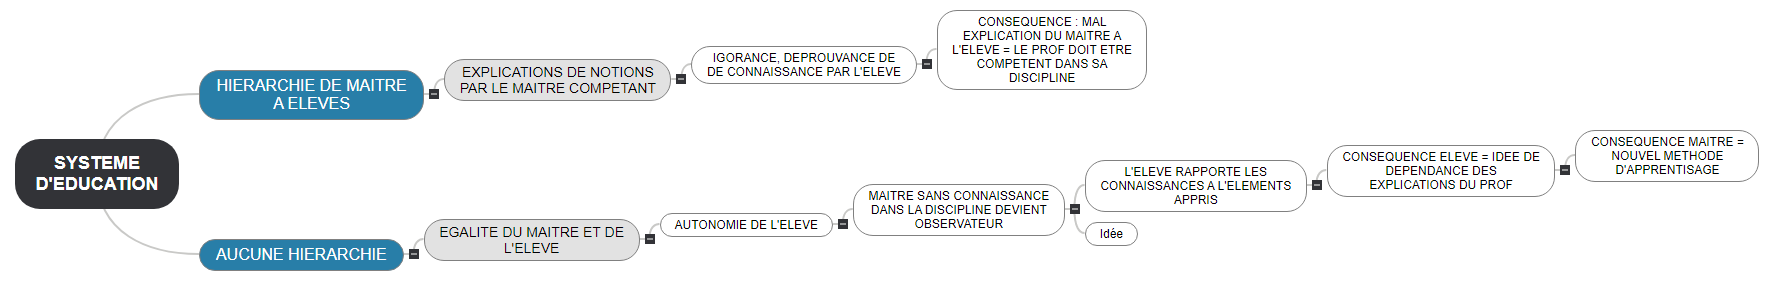 SYSTEME D'EDUCATION Mind Map